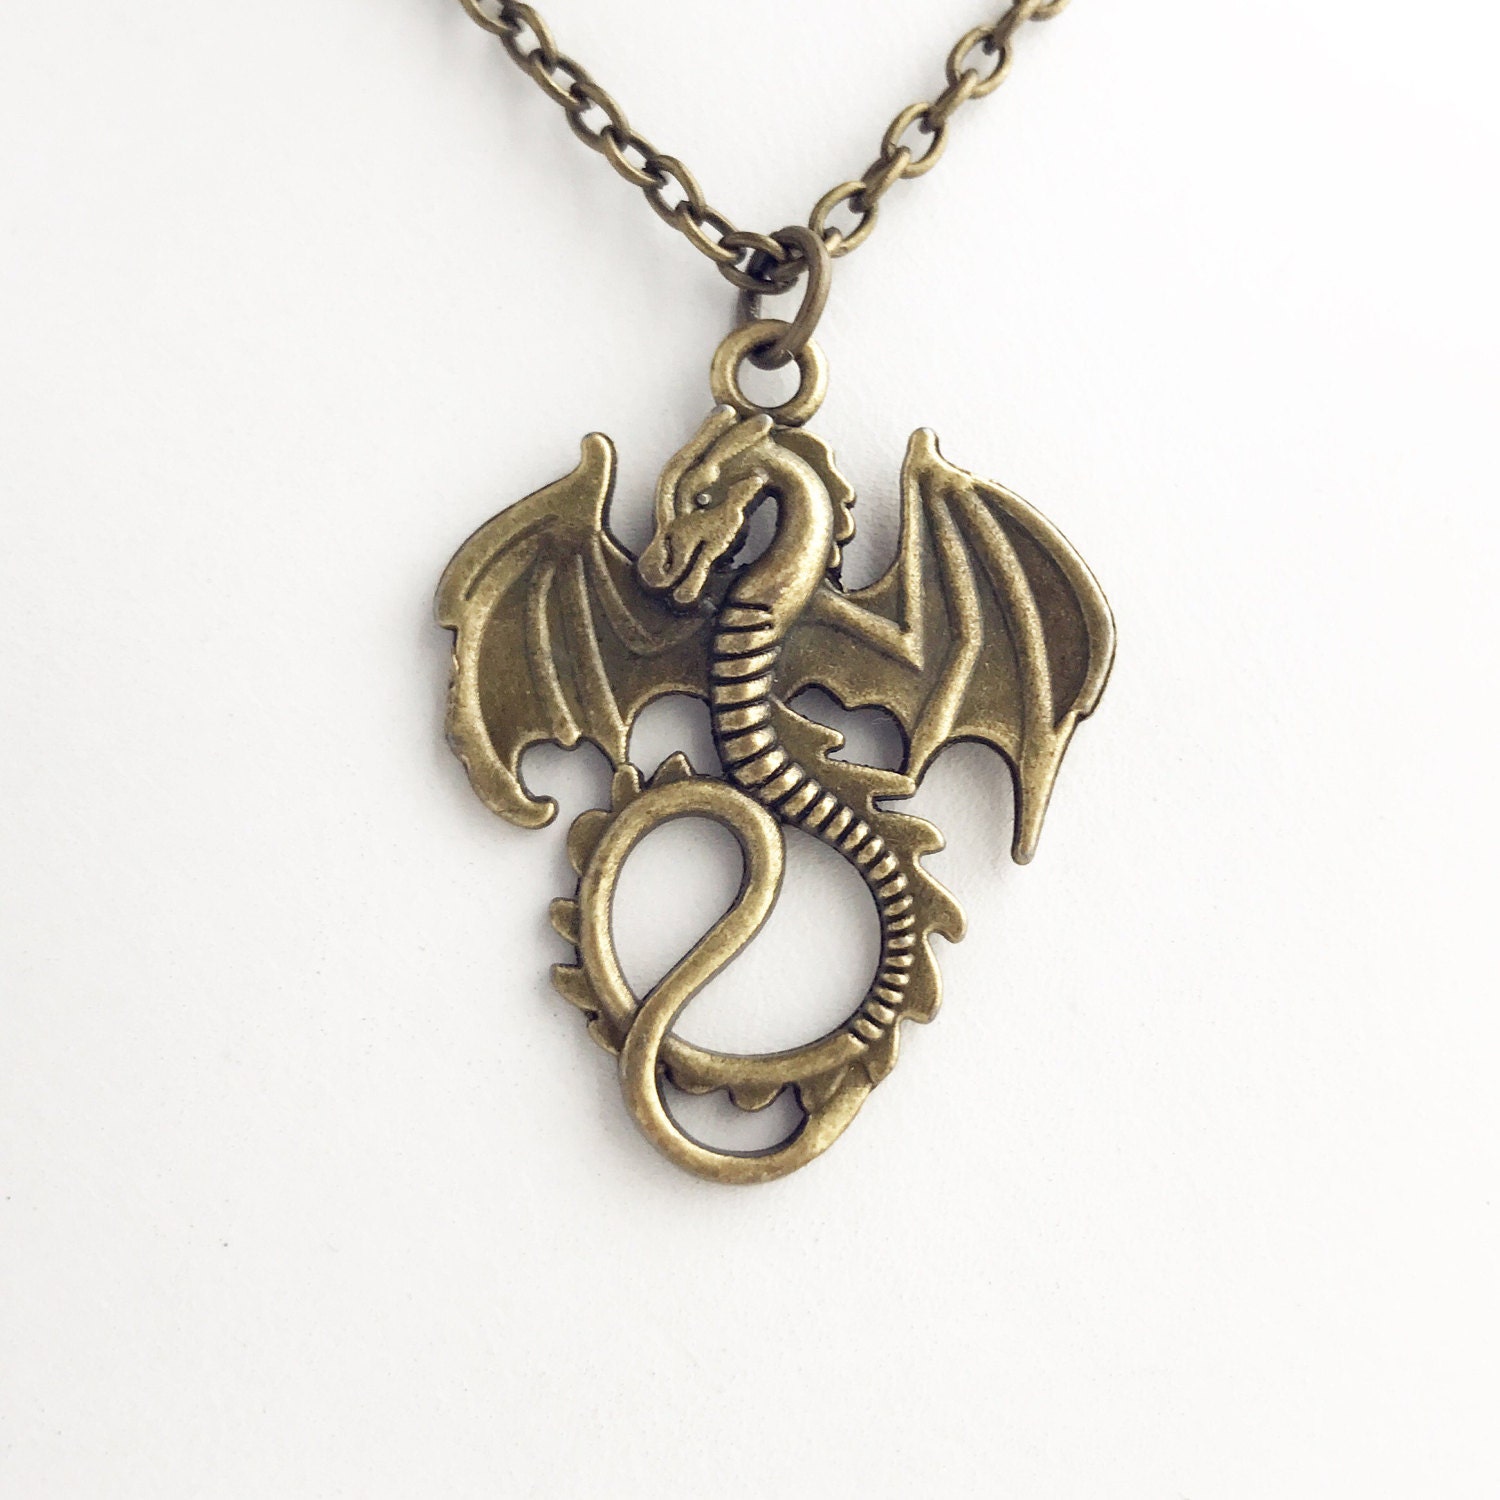 Ancient Silver Dragon Charm Necklace Winged Dragon Pendant Dragon Jewelry Mythical Creature 